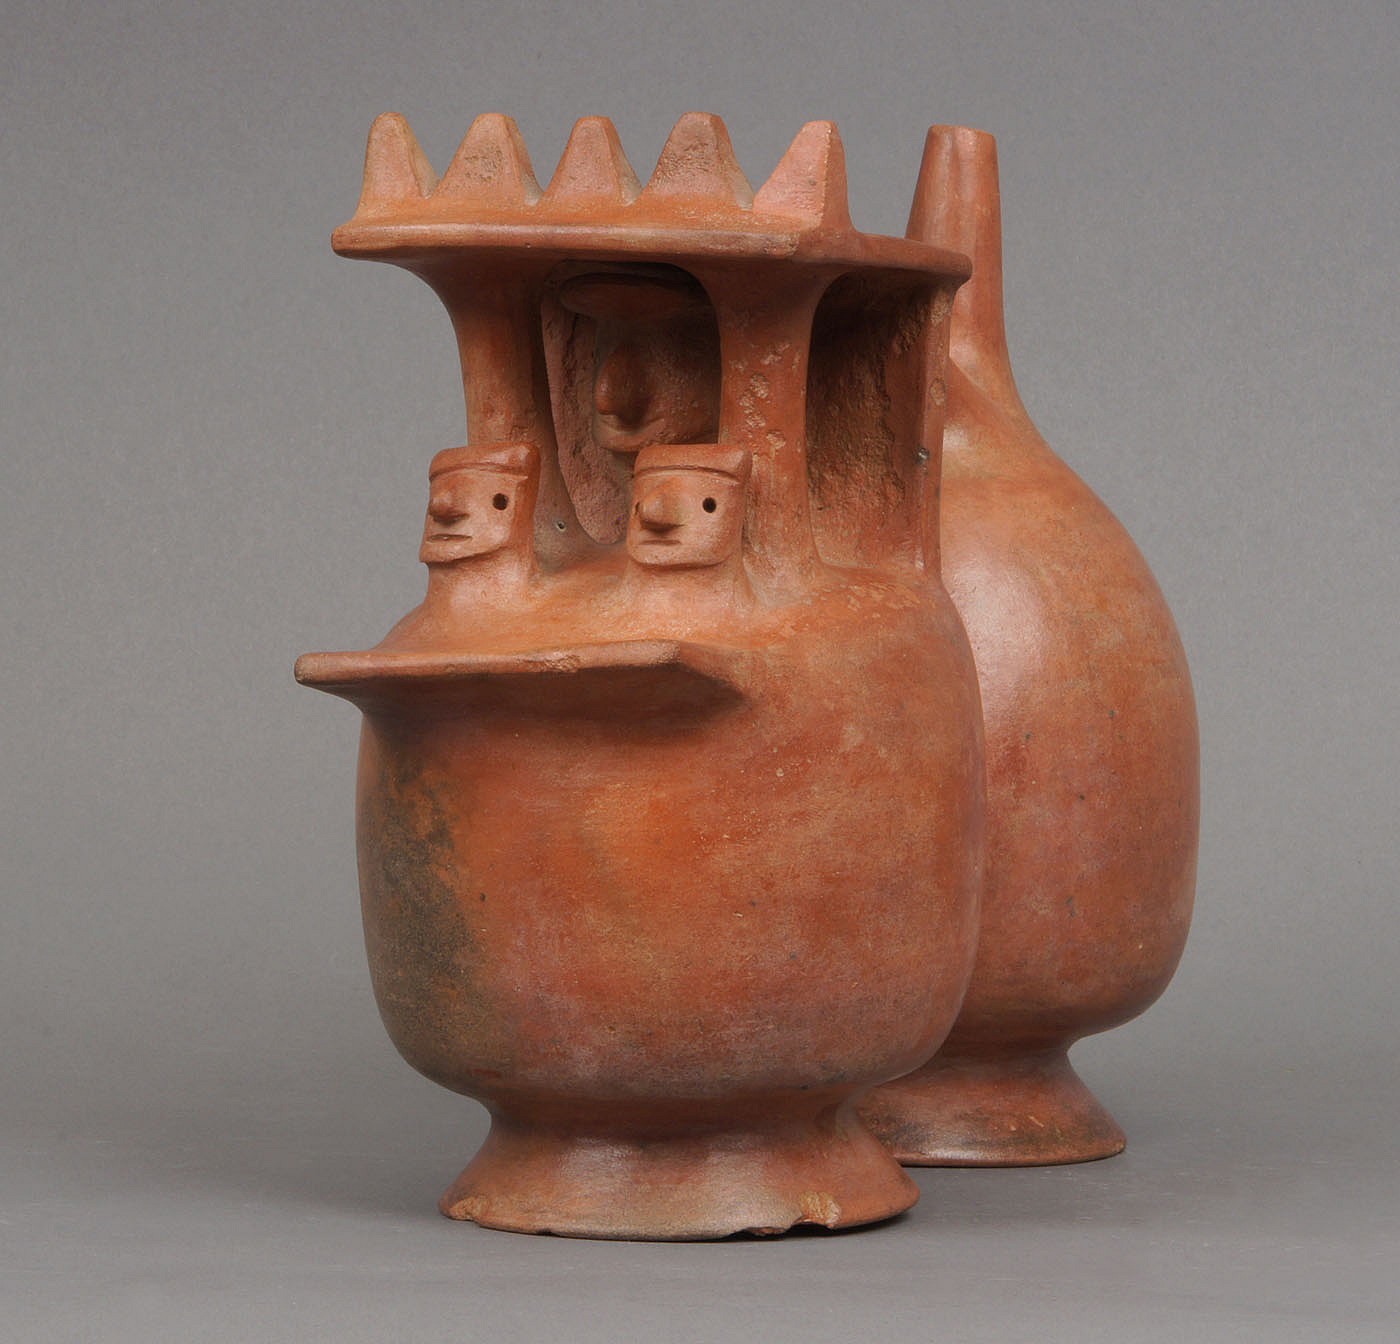 Peru, Virú Double Chambered Single Spout Whistling Vessel in the Form of a Temple
A strap handle orangeware vessel of a temple with lord and two attendants.  The two heads could also be architectural elements or trophy heads. There are traces of negative resist decoration. Larco Hoyle describes and llustrates similar shaped vessels in his monograph "Cronologia del Norte de Peru, La Cultura Virú" (1945: 4 and 8).
Media: Ceramic
Dimensions: Height 8" Length 7 1/2"
$4,500
92080